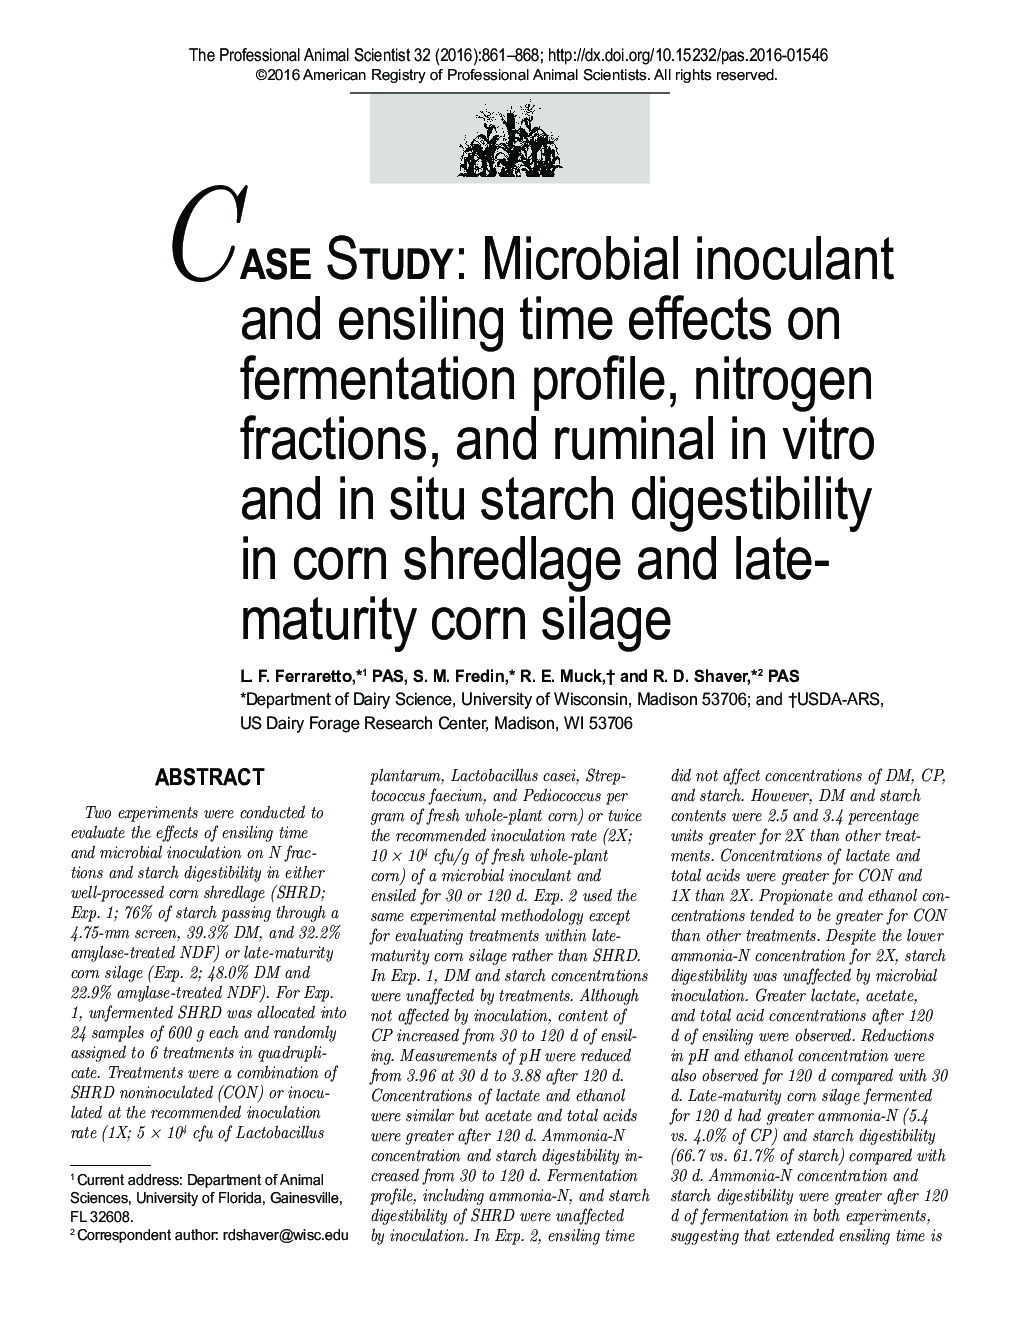 Case Study: Microbial inoculant and ensiling time effects on fermentation profile, nitrogen fractions, and ruminal in vitro and in situ starch digestibility in corn shredlage and late-maturity corn silage